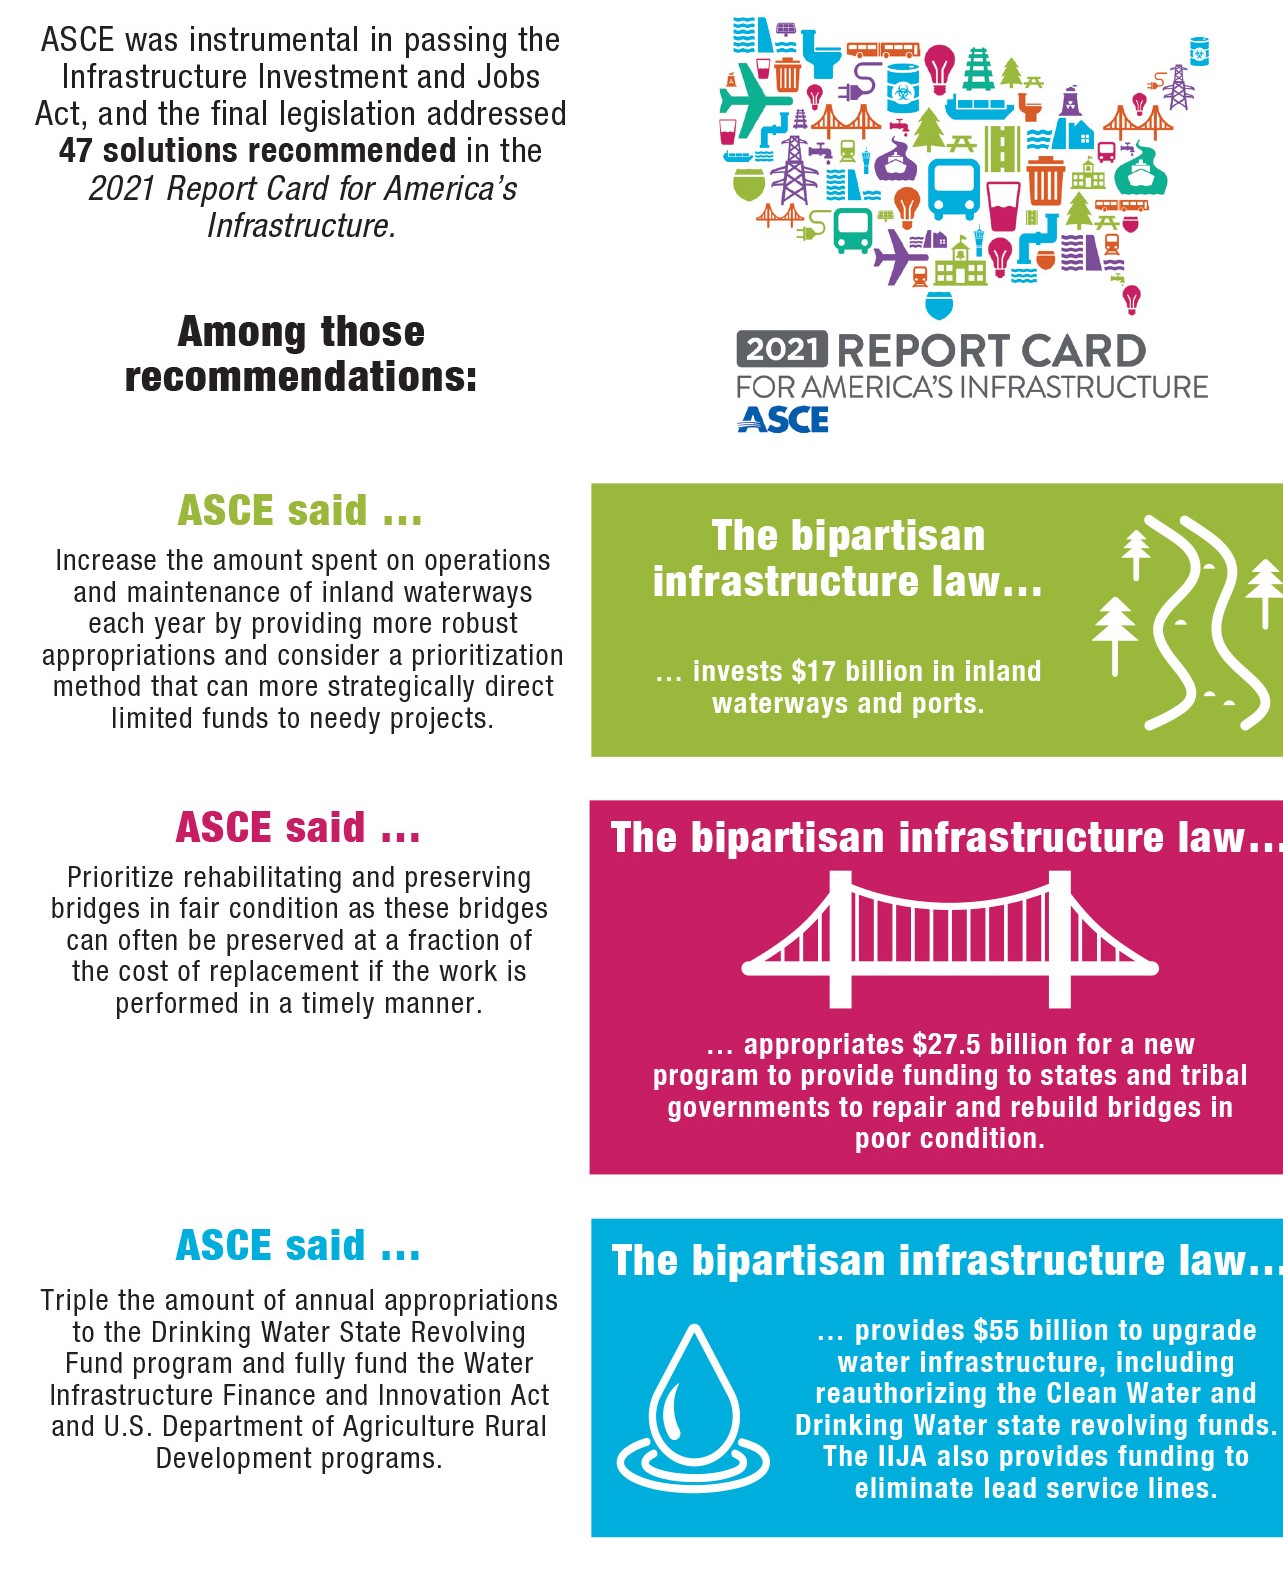 Picture of words on a white background and words in colorful boxes. They describe ASCE’s part in the passage of the infrastructure investment and jobs act.